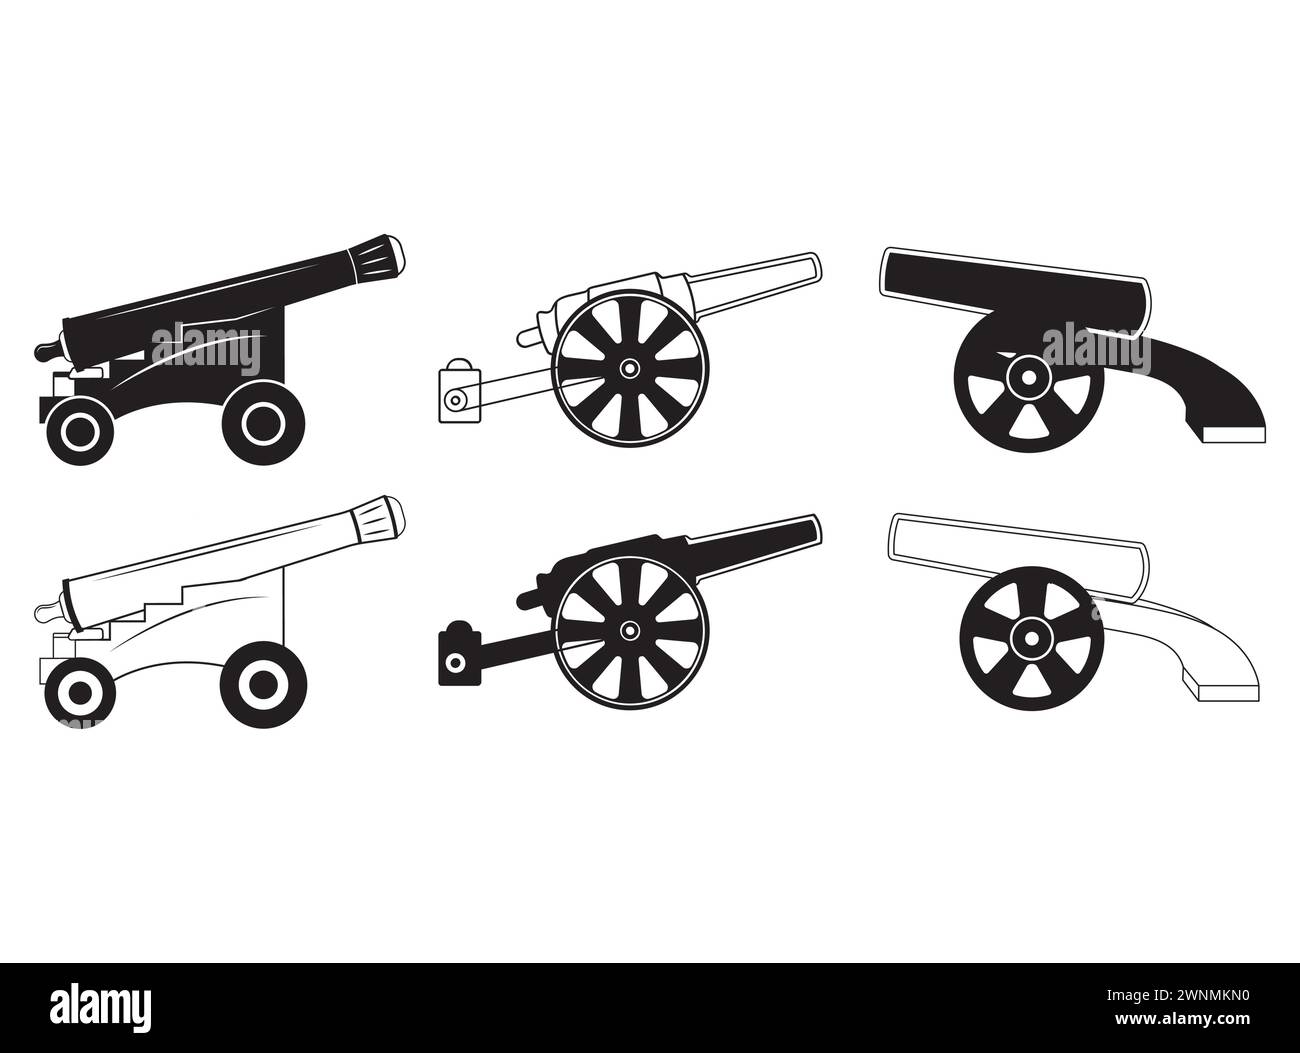 Cannon Vector, Military Weapon, Cannon Clipart, Cannon Icon, Cannon Cut Files, Cannon Vector, Cut file, for silhouette, Realistic Cannon Stock Vector